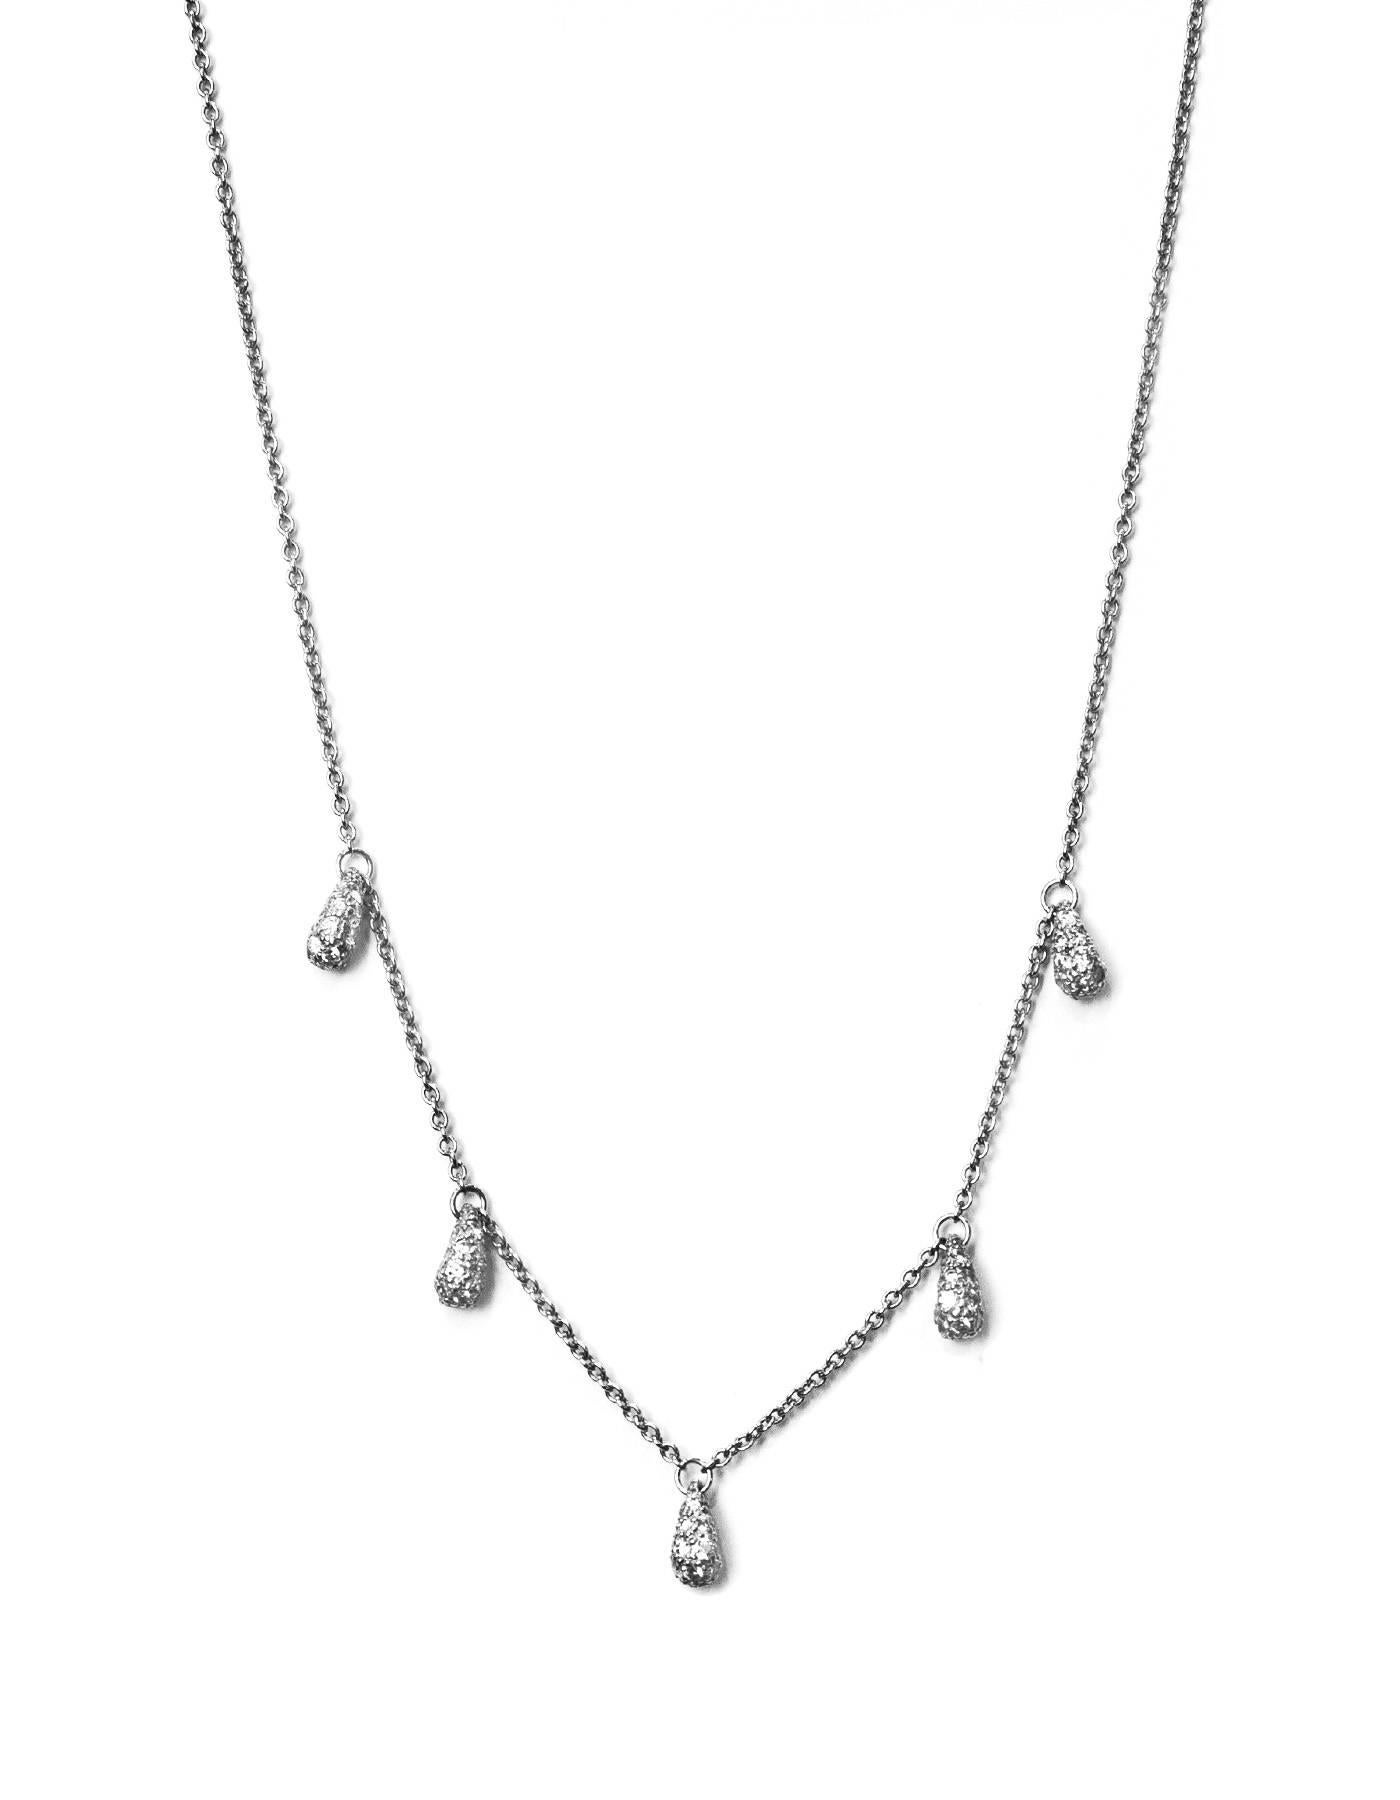 Tiffany & Co. Elsa Peretti Diamond & Platinum Necklace
Features 5 tear drop pendants with pavé diamonds set in platinum. Tear drops inspired by a solitary raindrop or a shining bead of morning dew.
Color: Silver
Materials: Diamonds and